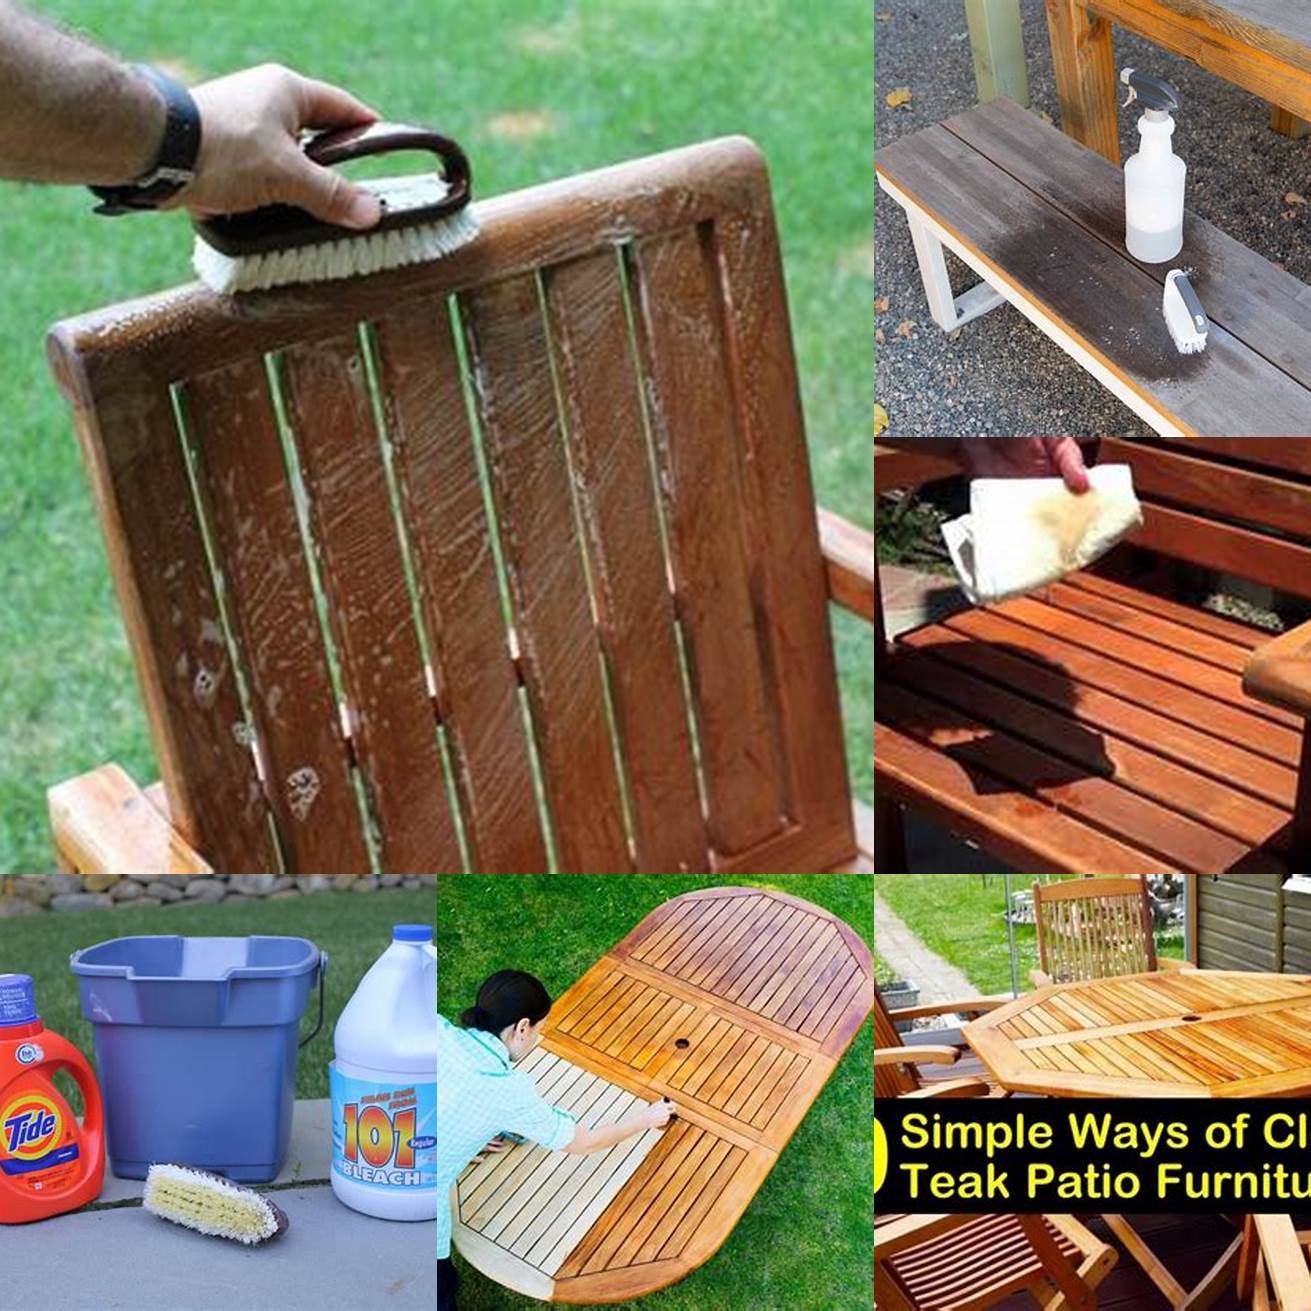 Always use a mild detergent and warm water to clean your teak furniture